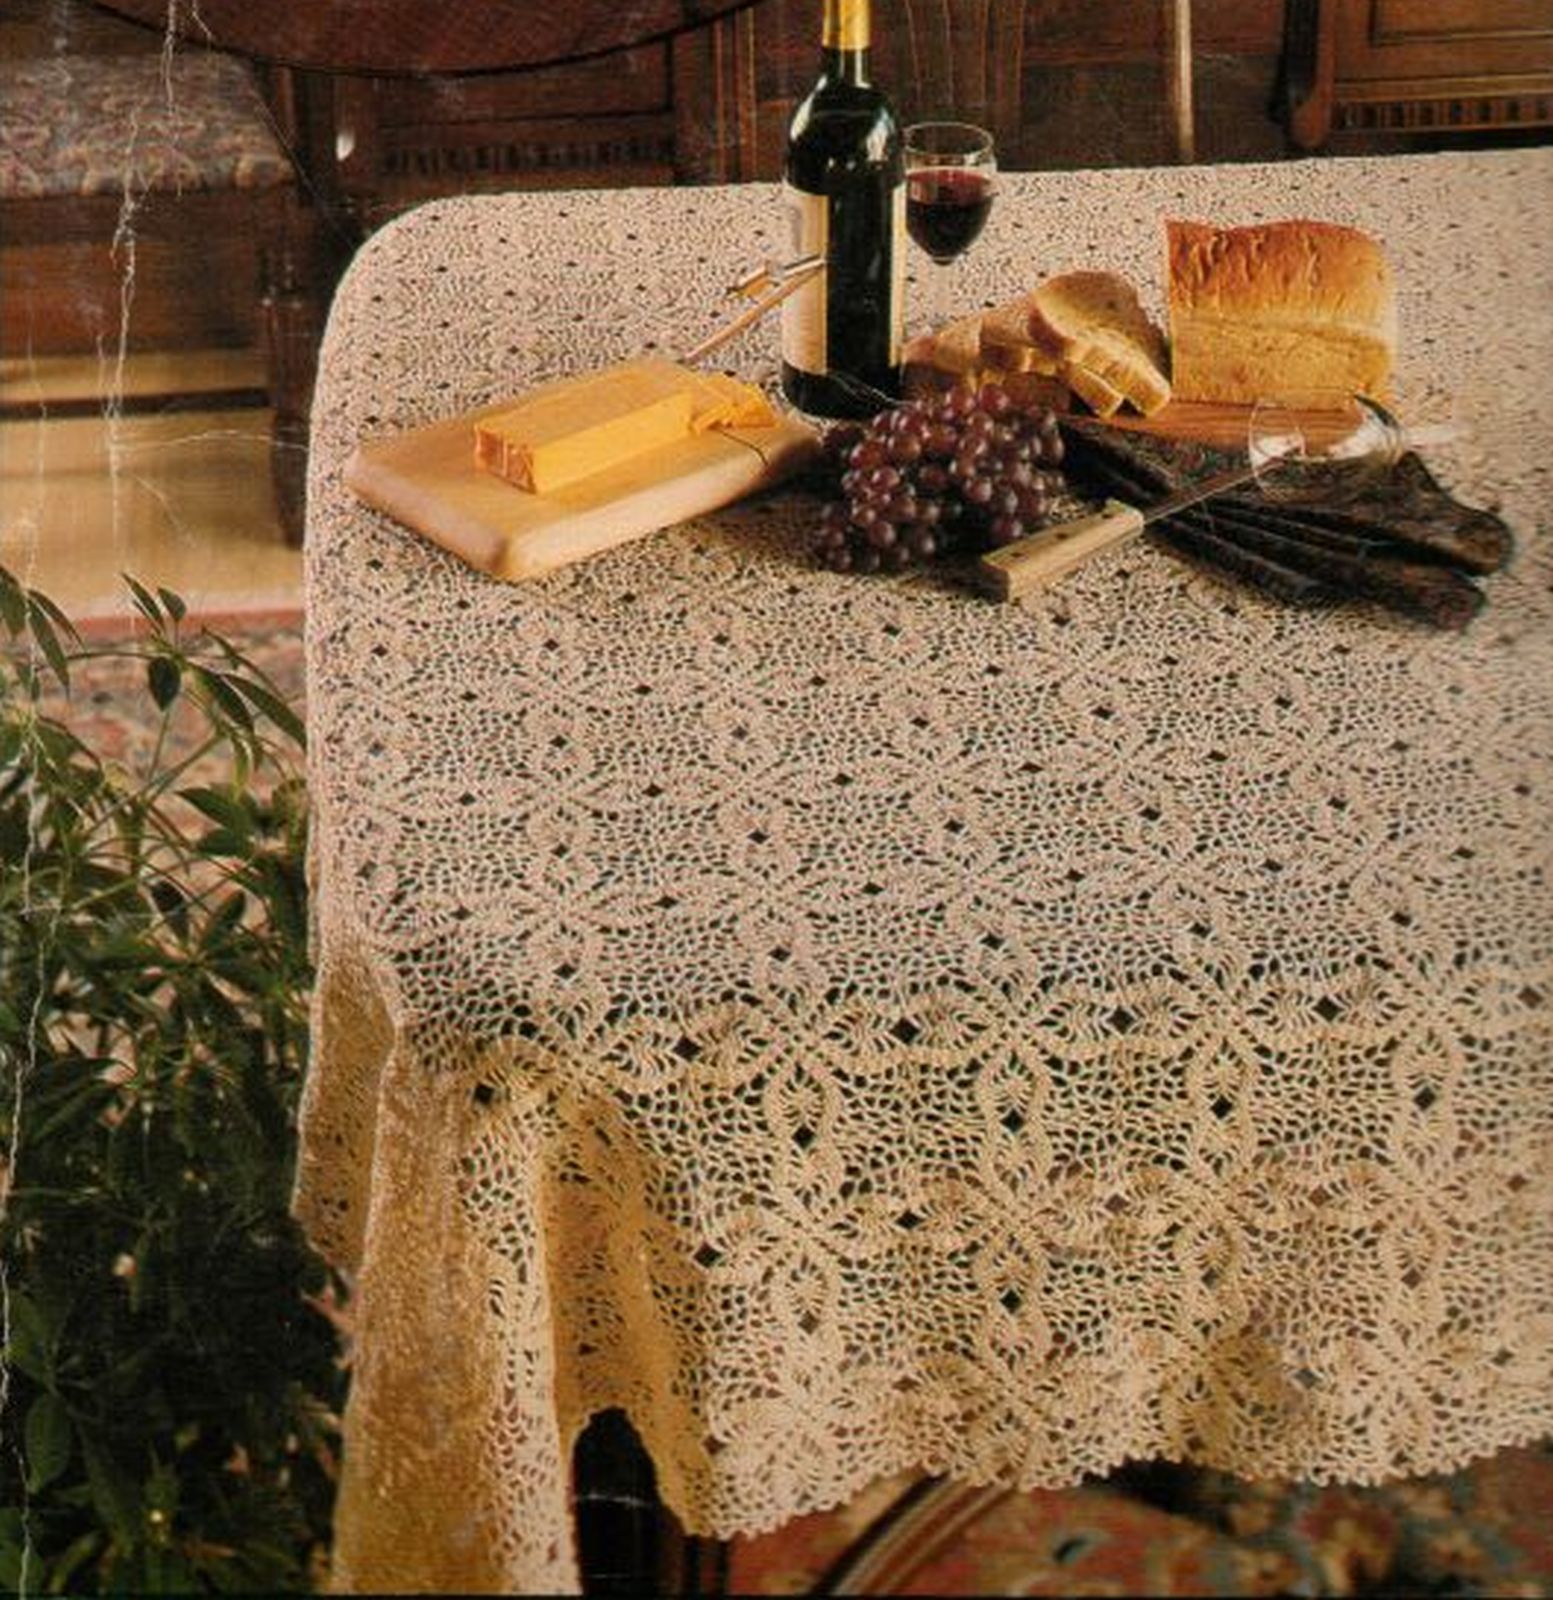 Primary image for Thread Crochet Edgings Tablecloth Pineapple Doily Place Mat Ornaments PATTERNS